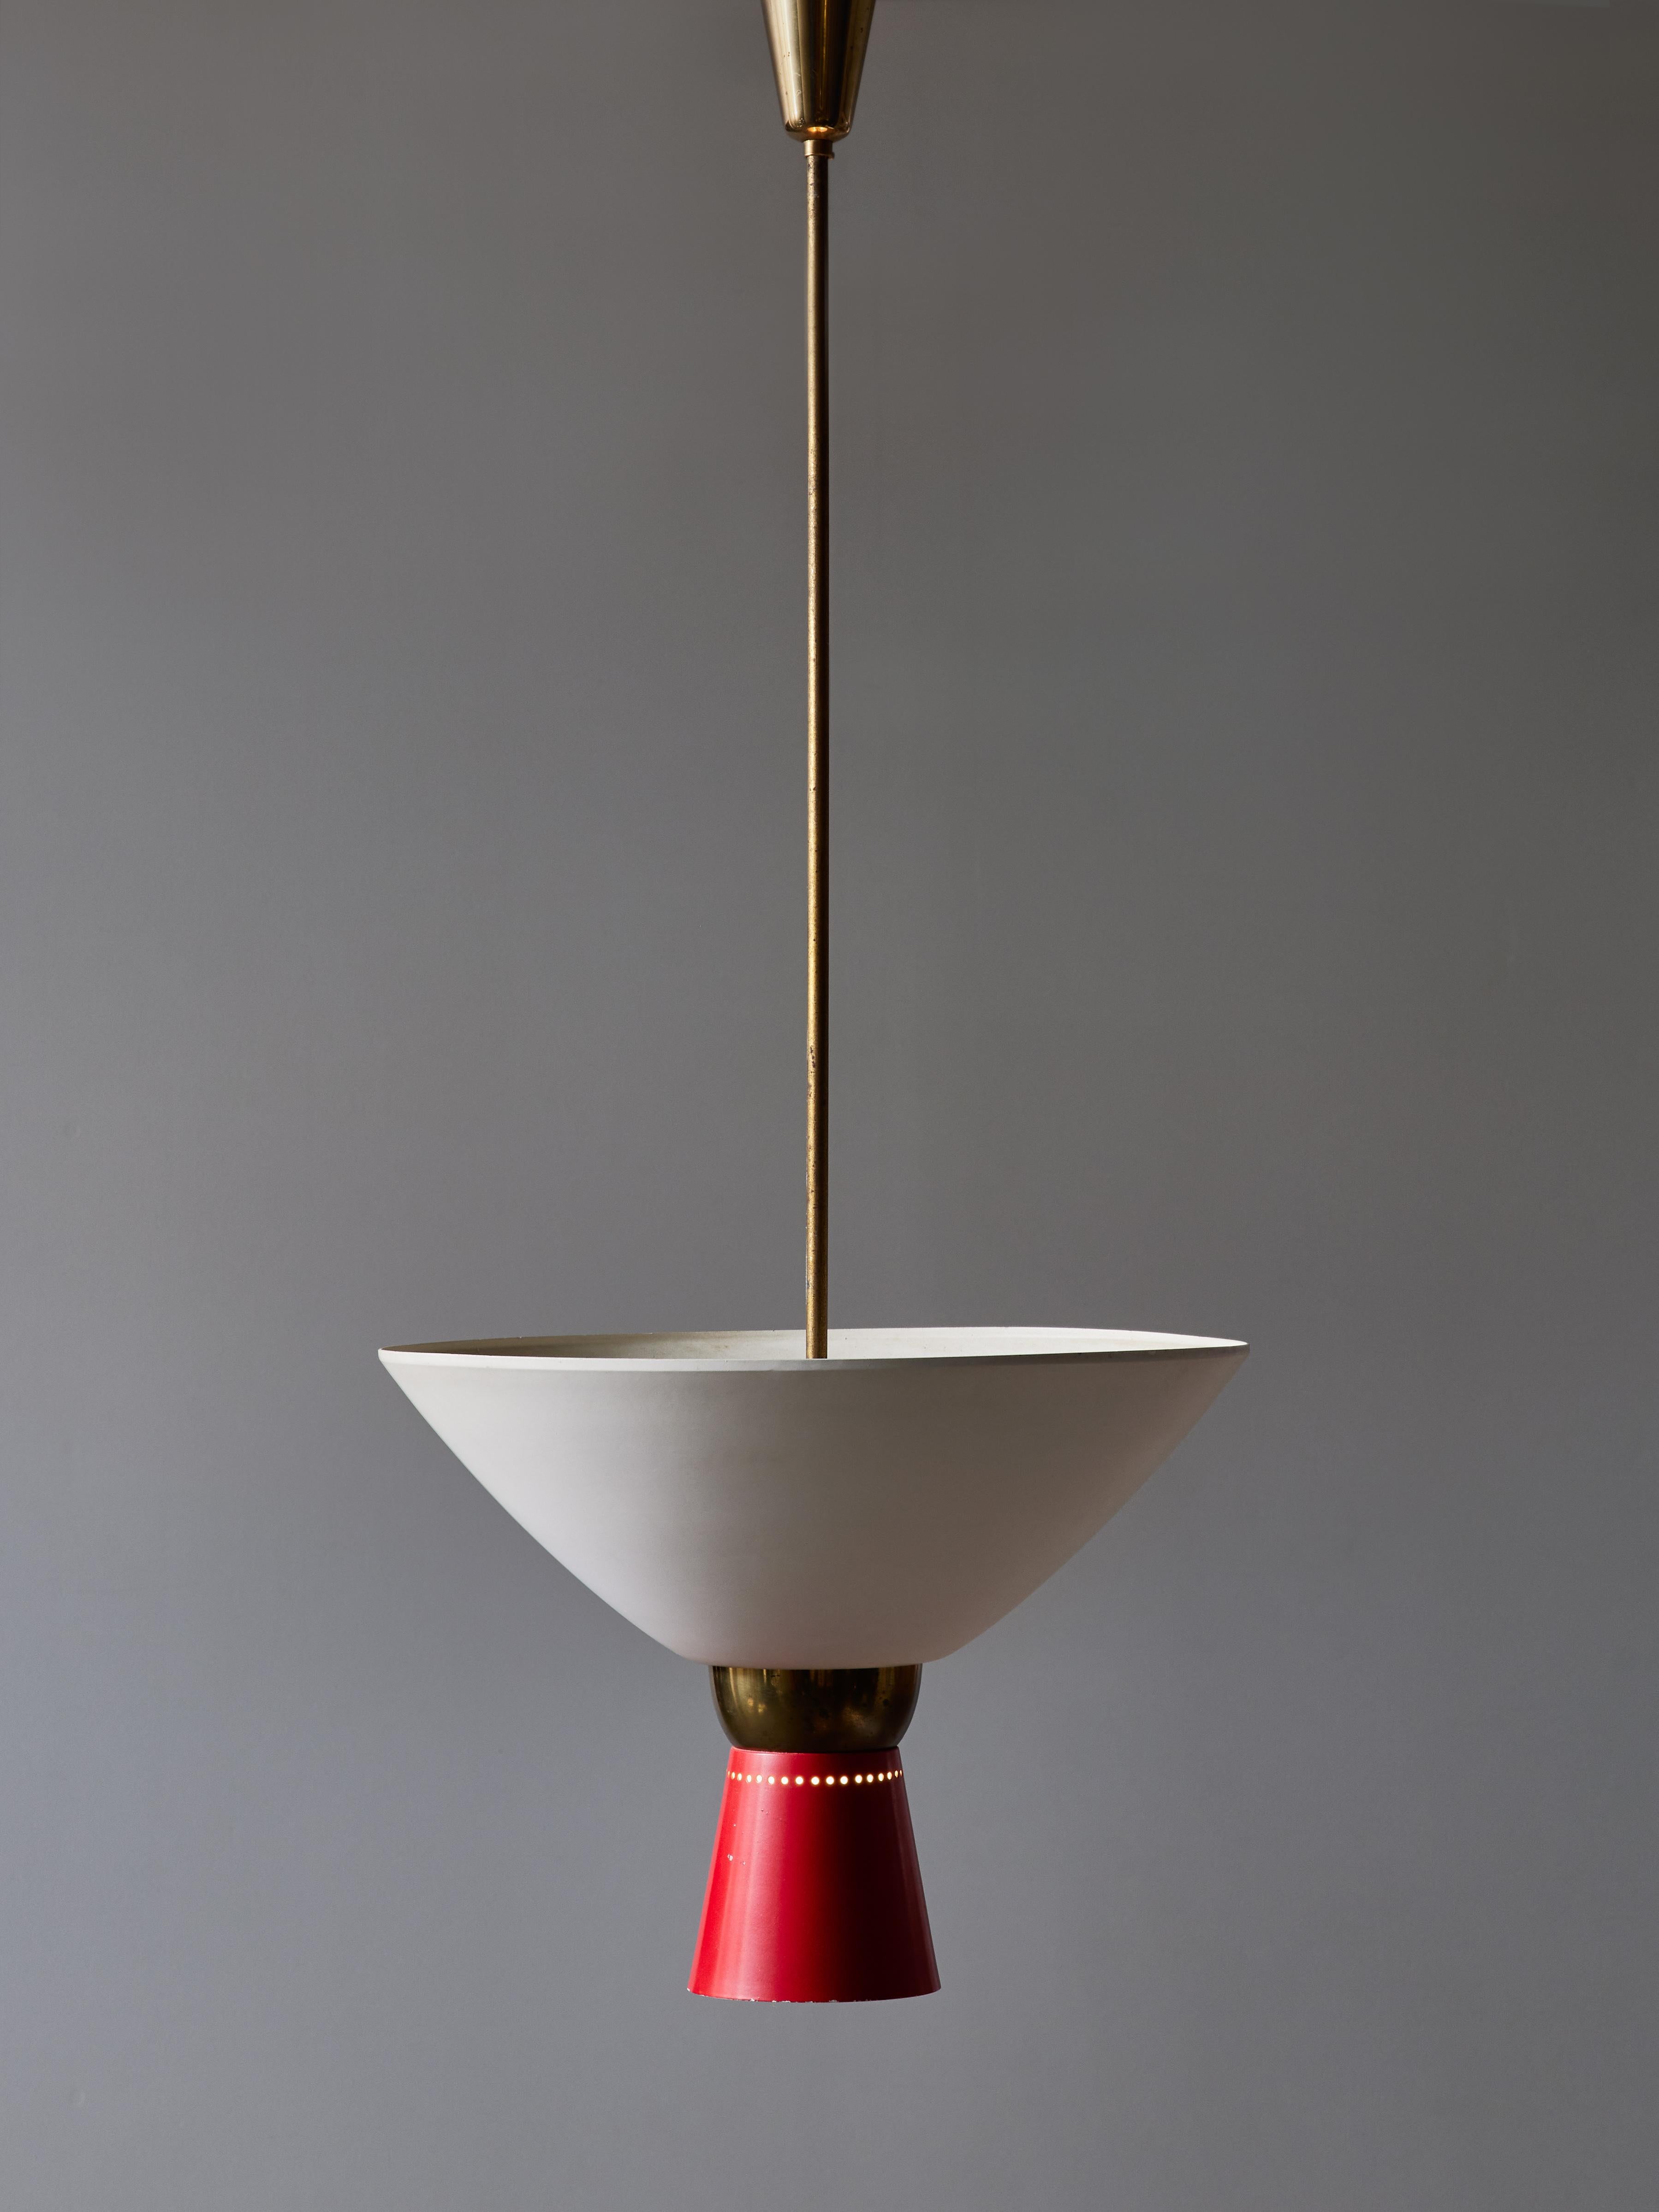 Single suspension made of two lacquered cones and a central brass sphere. One light in each cone. Original manufacturer sticker in the white cone.